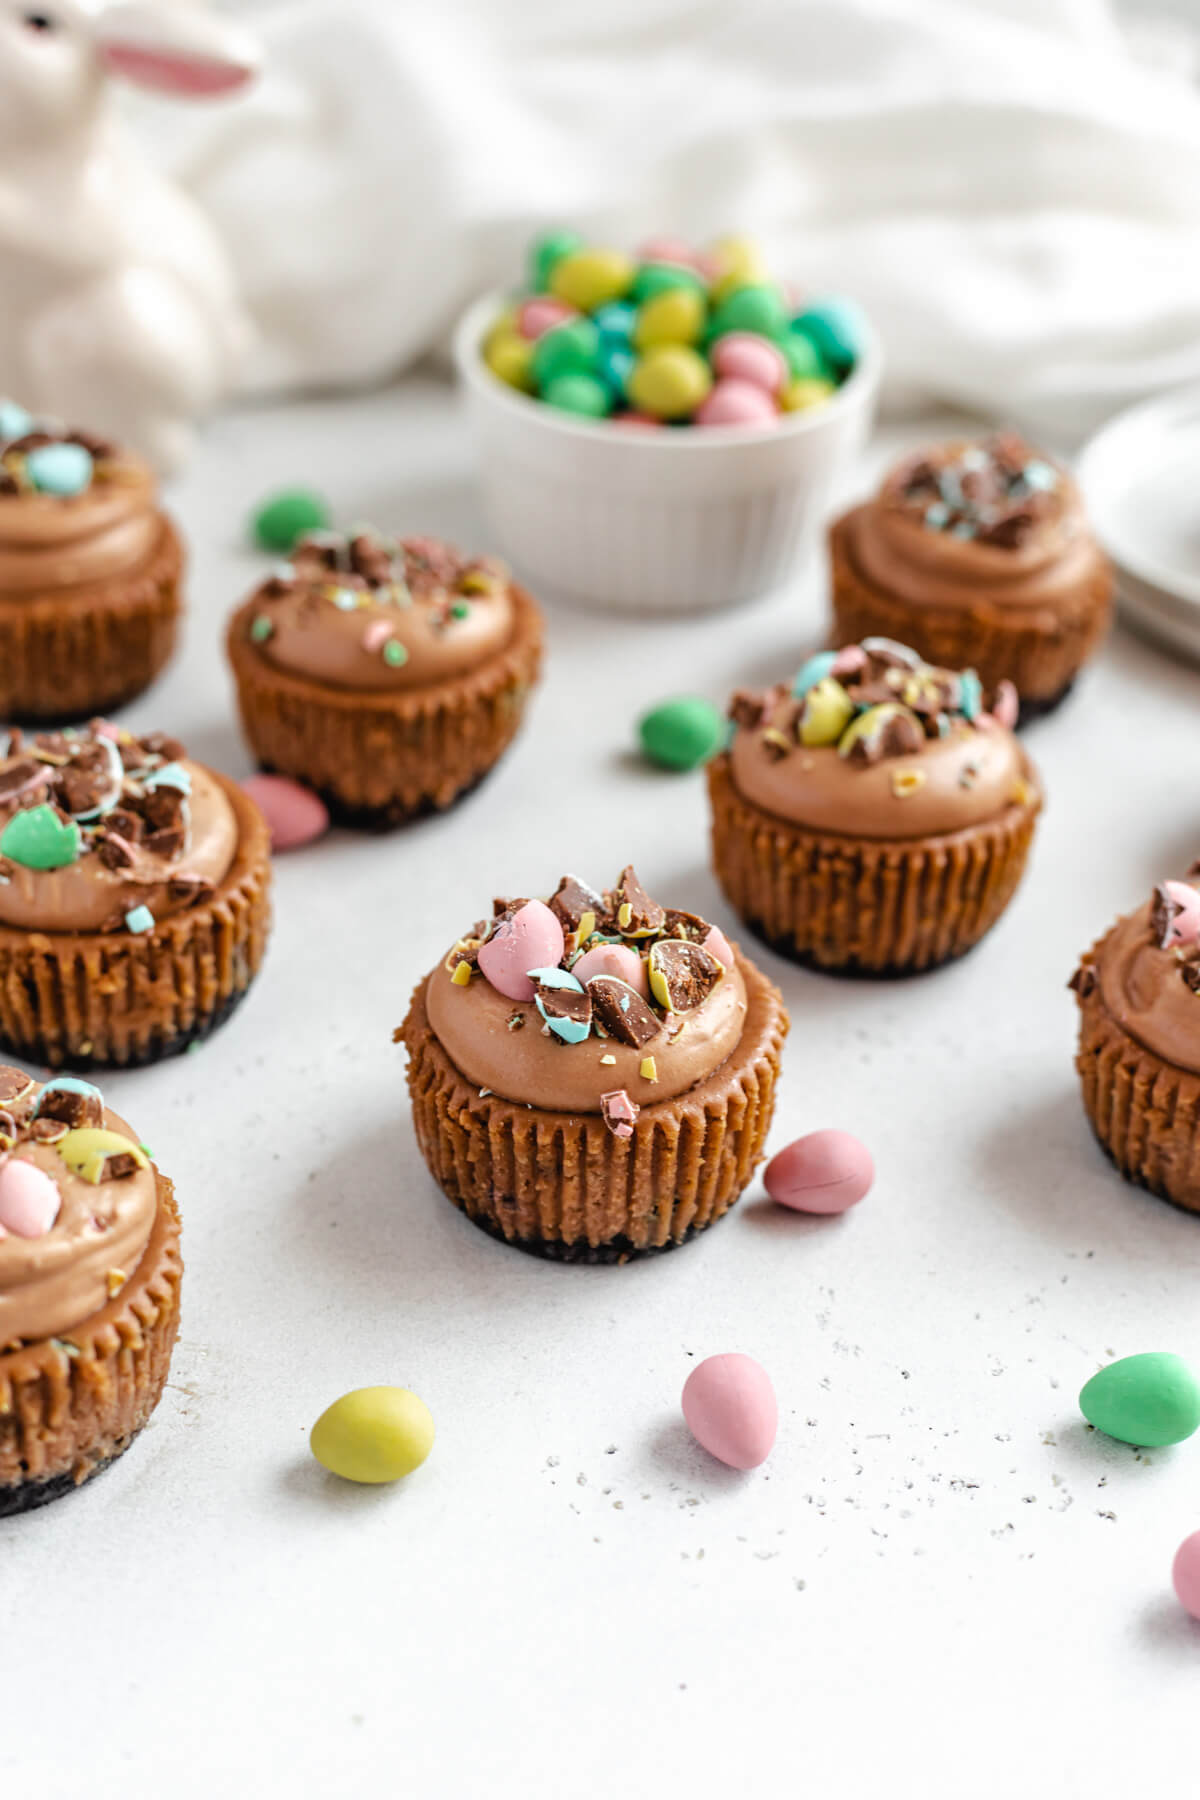 mini cheesecakes topped with mousse and chopped chocolate eggs